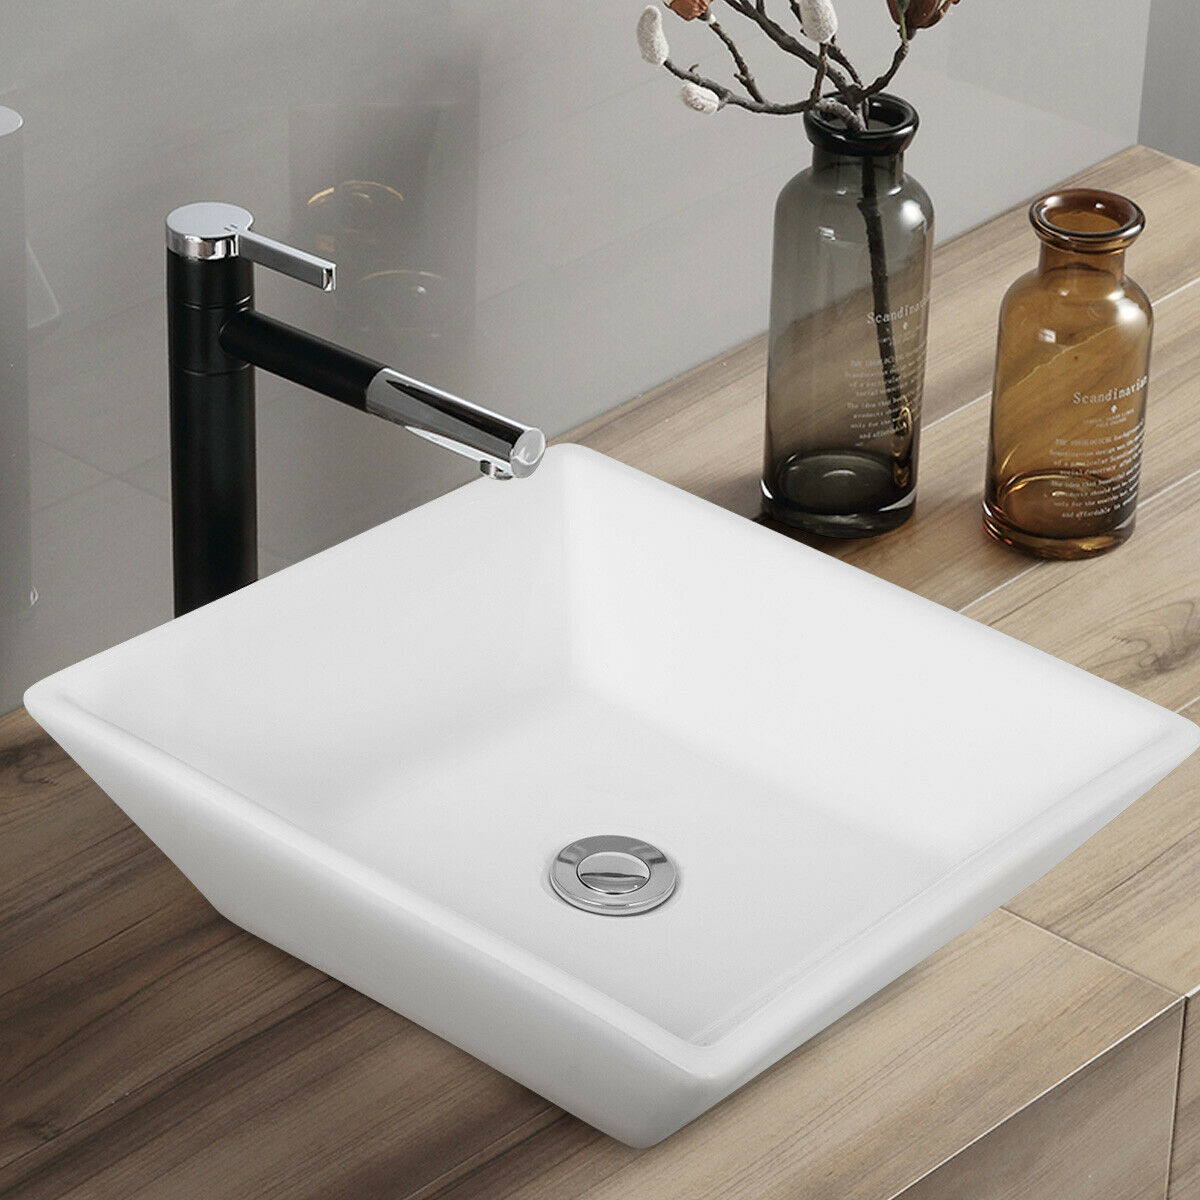 16 in. x 16 in. Square Bathroom Ceramic Vessel Sink With Pop-Up Drain